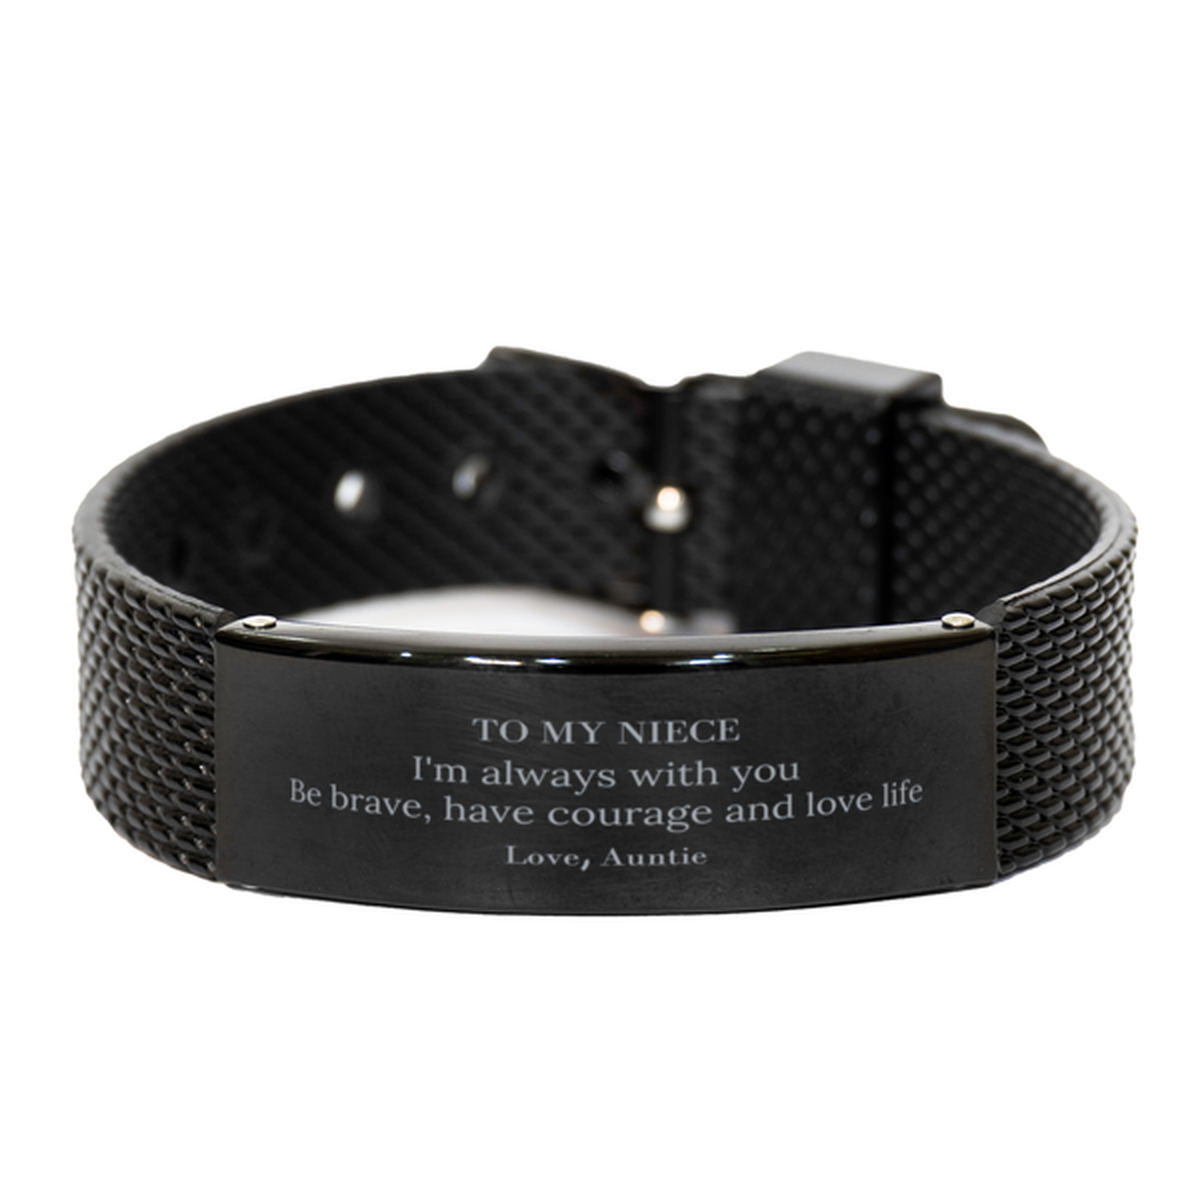 To My Niece Gifts from Auntie, Unique Black Shark Mesh Bracelet Inspirational Christmas Birthday Graduation Gifts for Niece I'm always with you. Be brave, have courage and love life. Love, Auntie